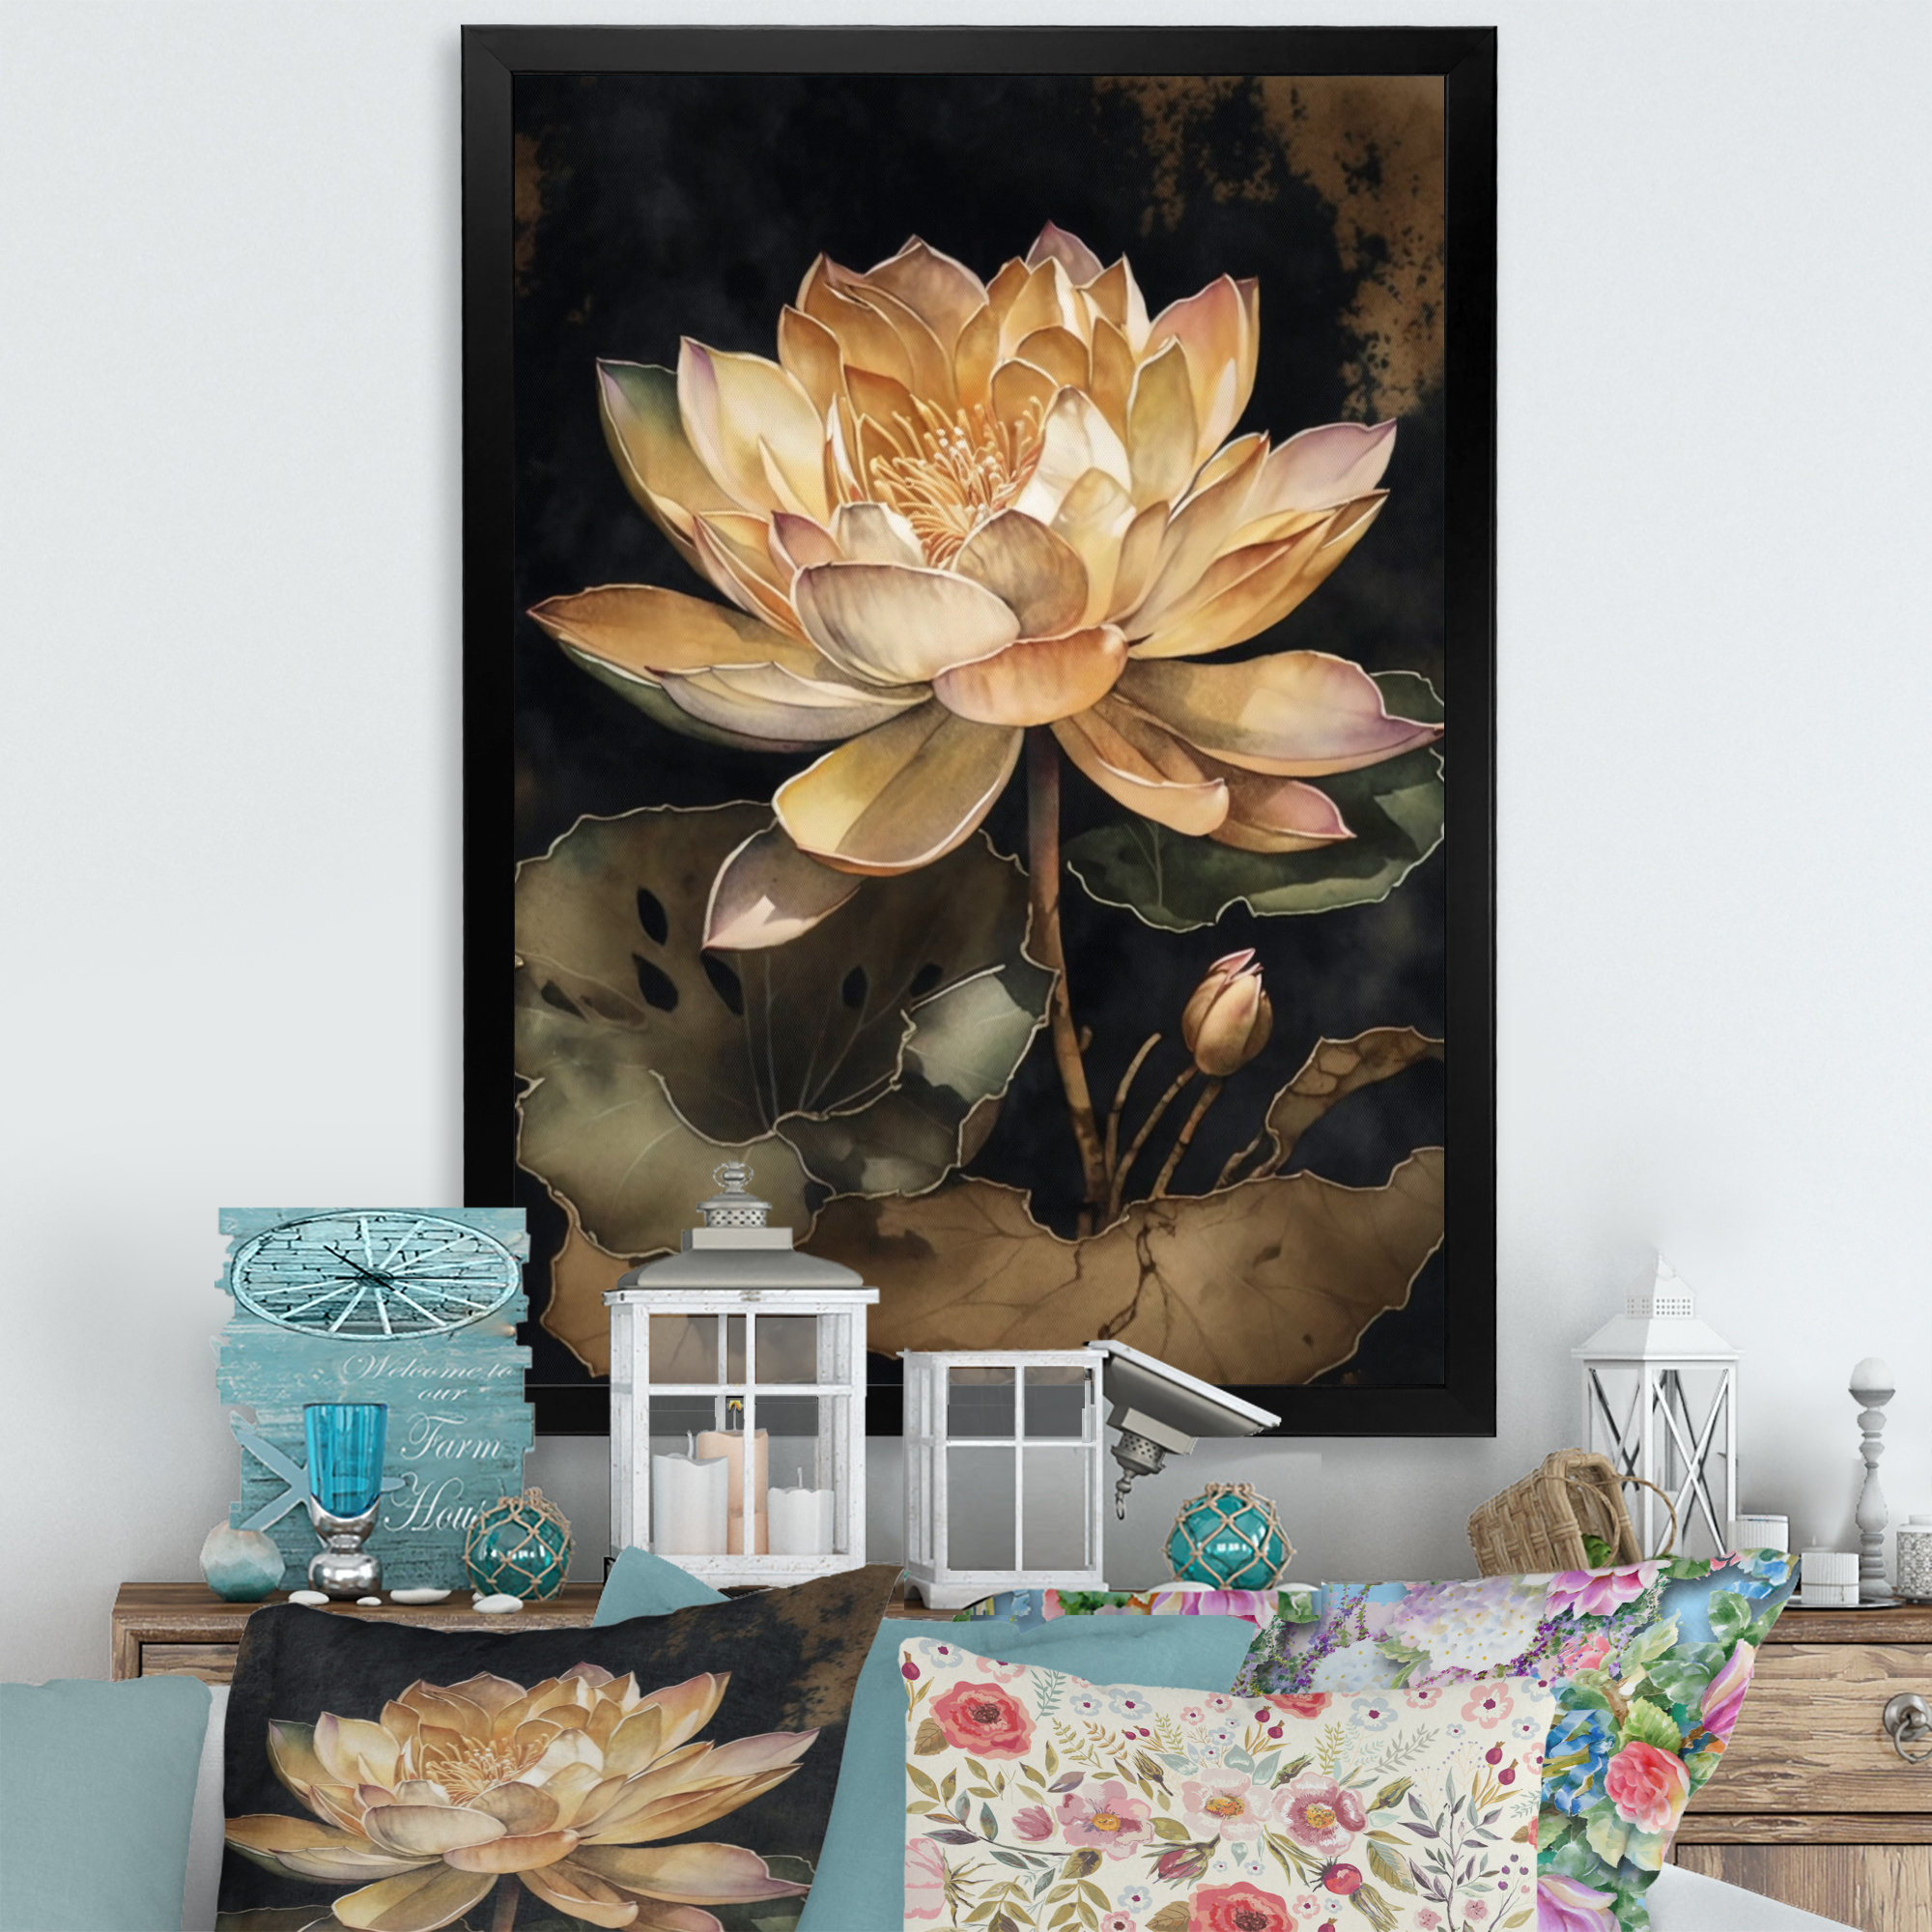 Blooming Vintage Lotus in The Pond I - Print On Canvas Red Barrel Studio Format: Gold Floater Framed Canvas, Size: 40 H x 30 W x 1.5 D